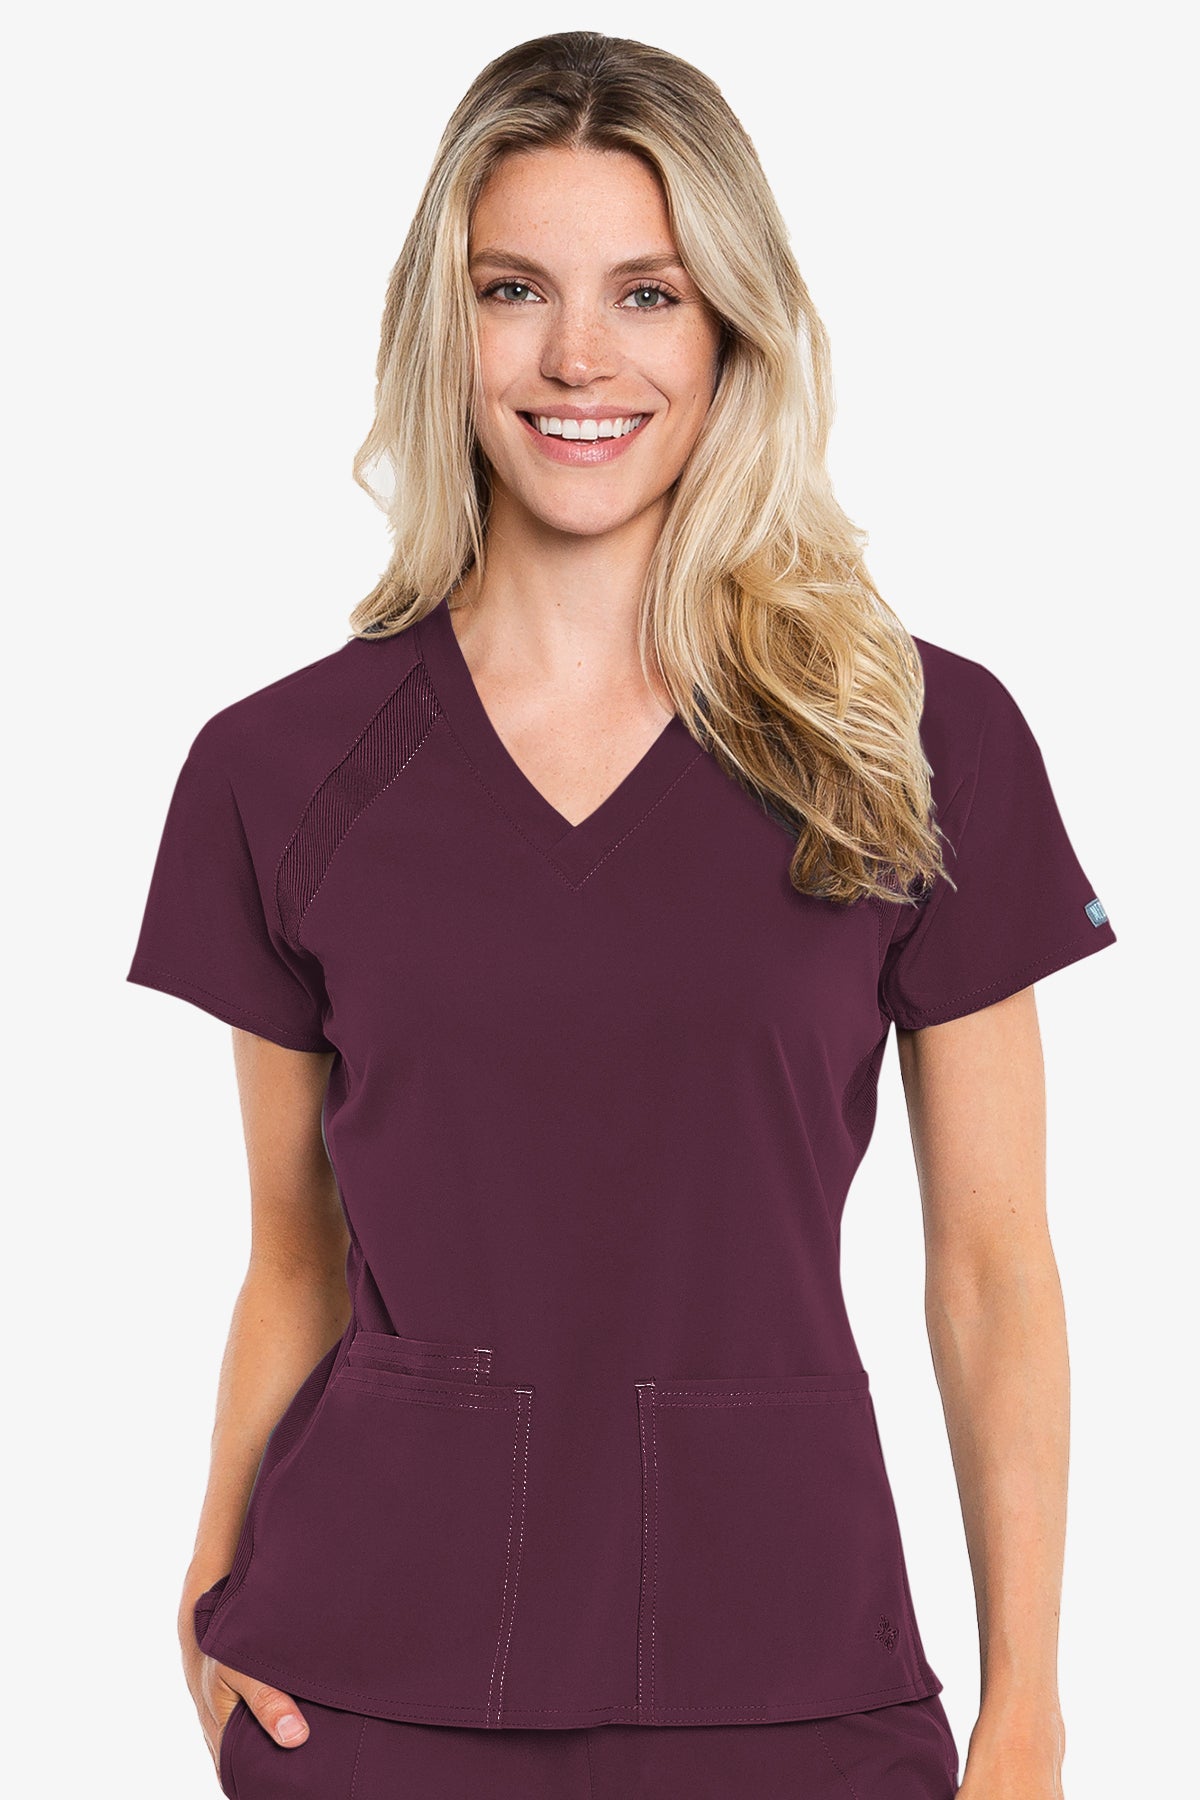 MED COUTURE Raglan Top #8470 - Butterfly Touch Scrubs